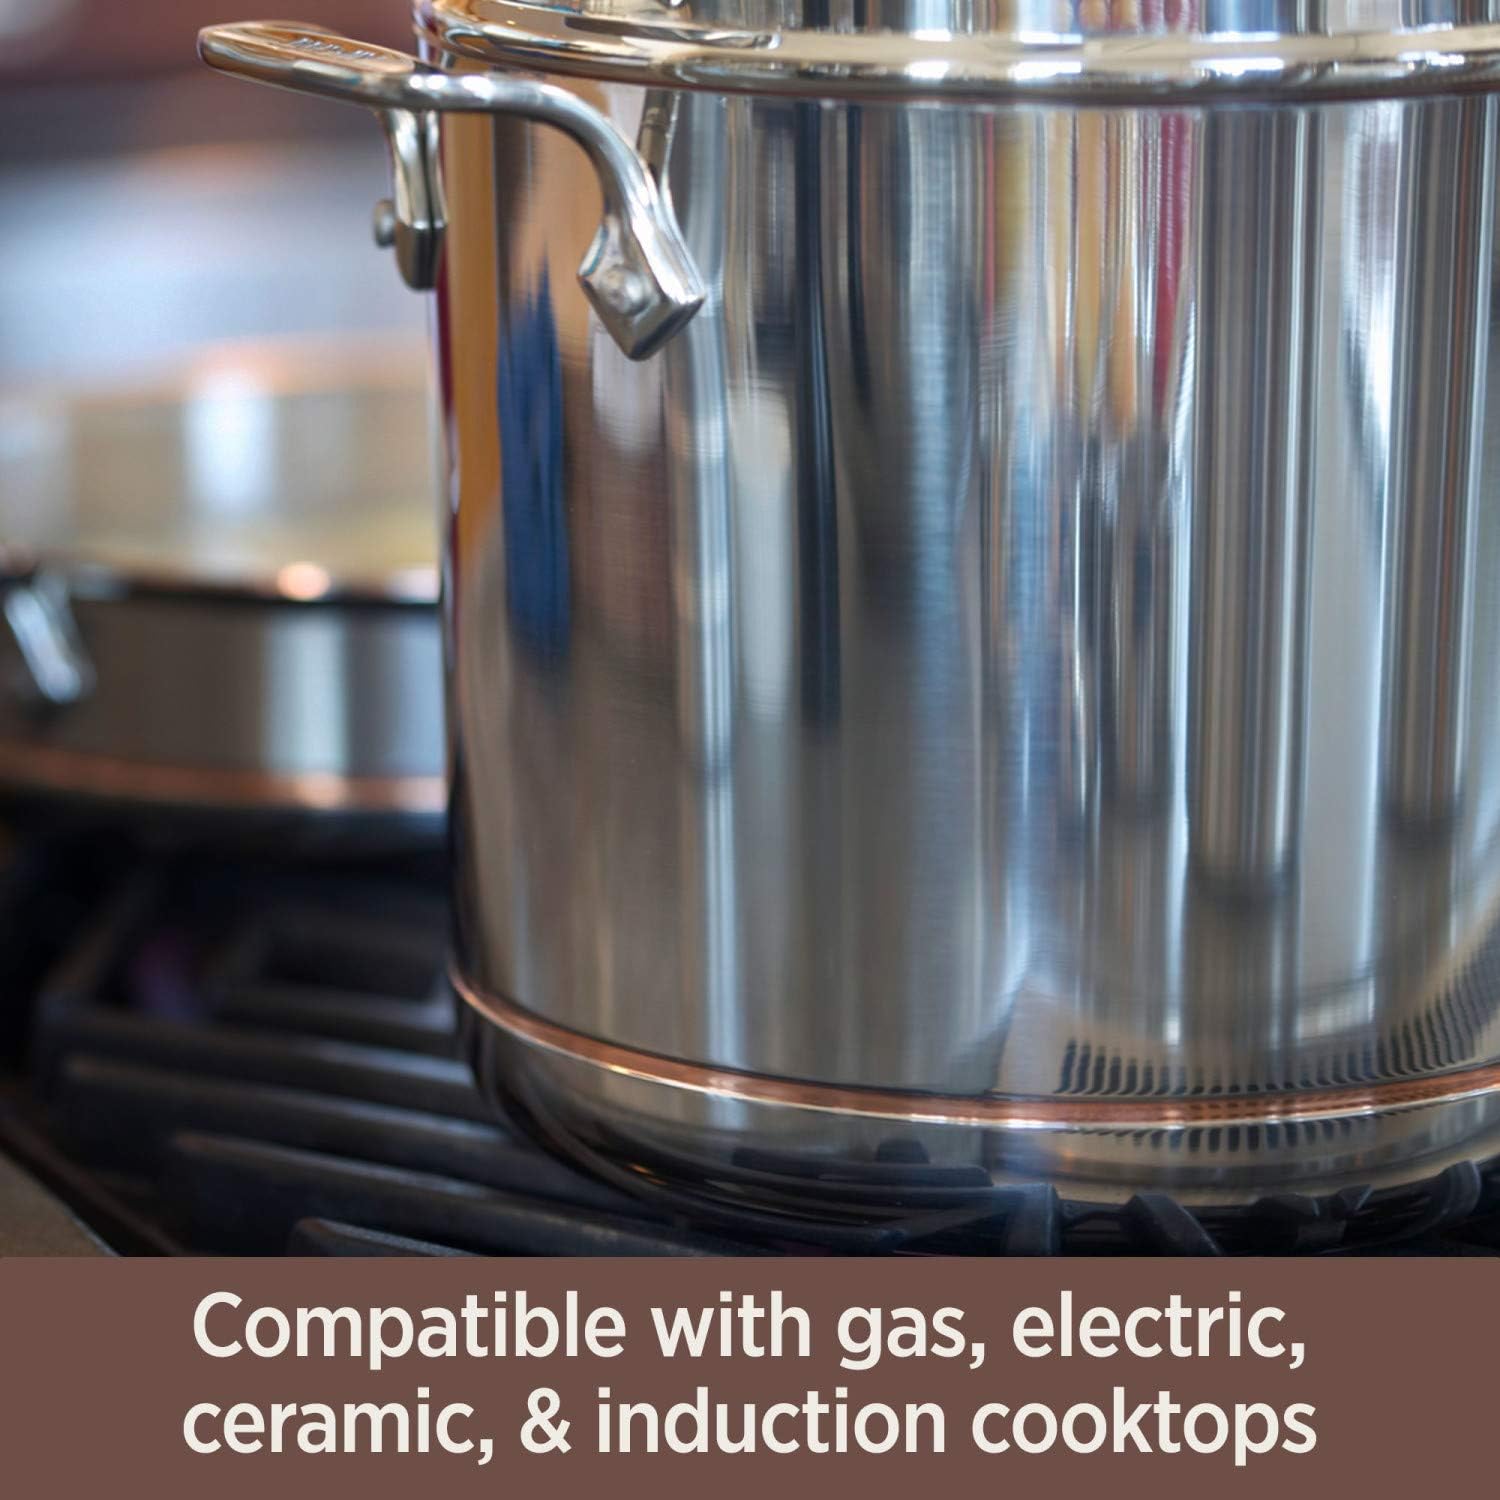 https://bigbigmart.com/wp-content/uploads/2023/09/All-Clad-Copper-Core-5-Ply-Stainless-Steel-Saute-Pan-with-Steel-Lid-5-Quart-Induction-Oven-Broil-Safe-600F-Pots-and-Pans-Cookware3.jpg